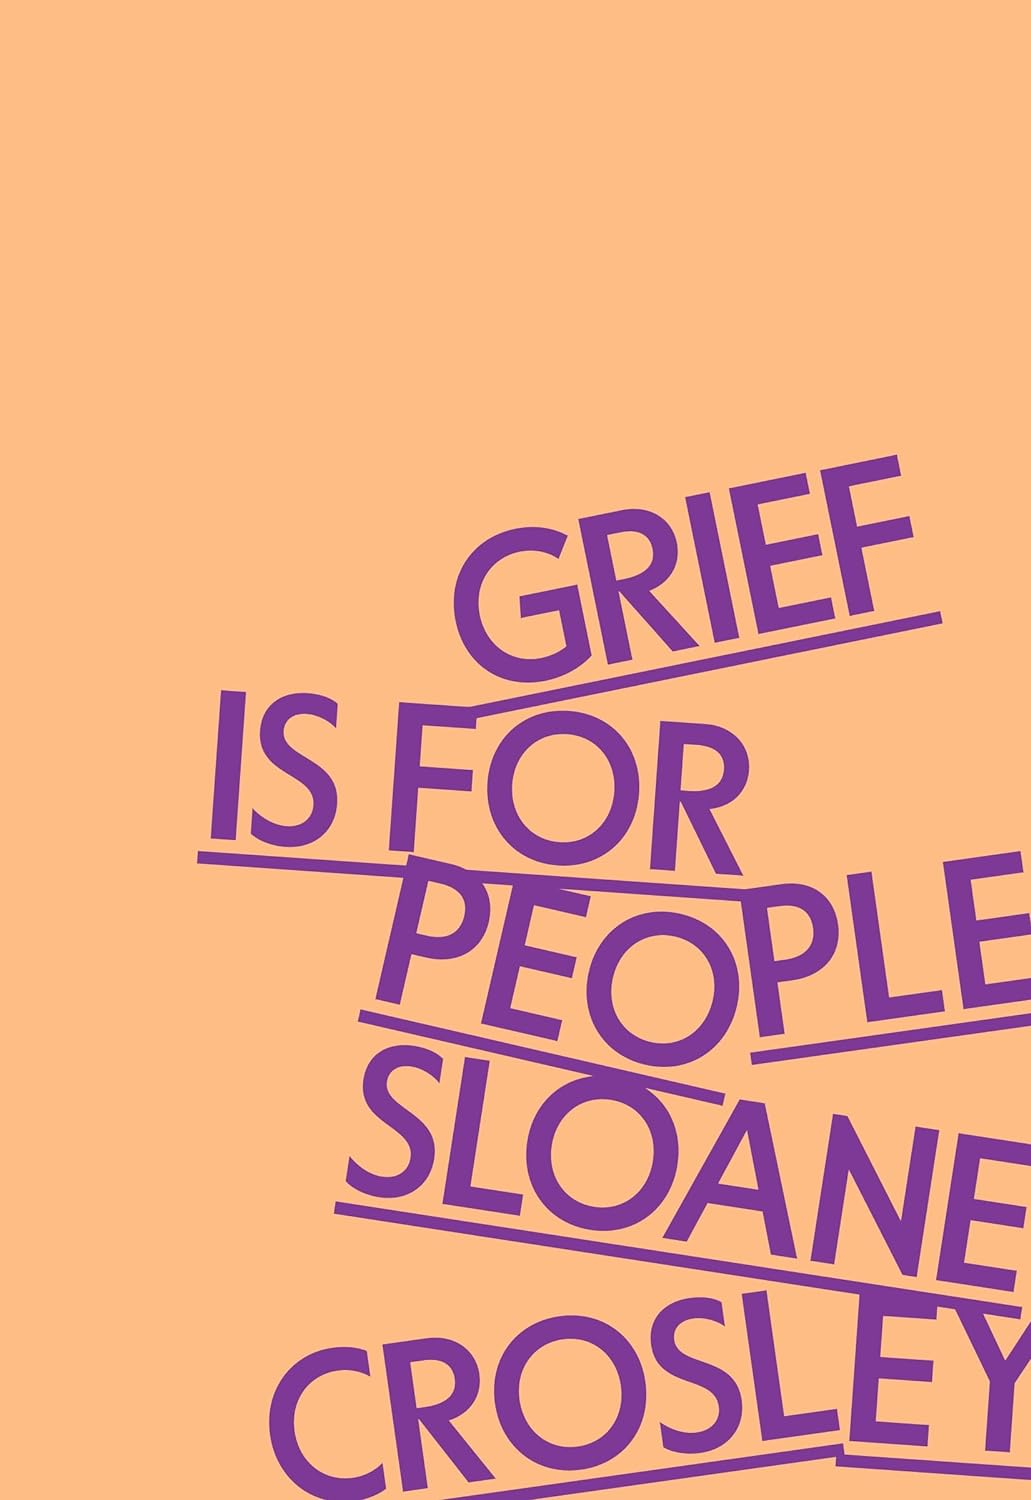 Grief Is for People, by Sloane Crosley